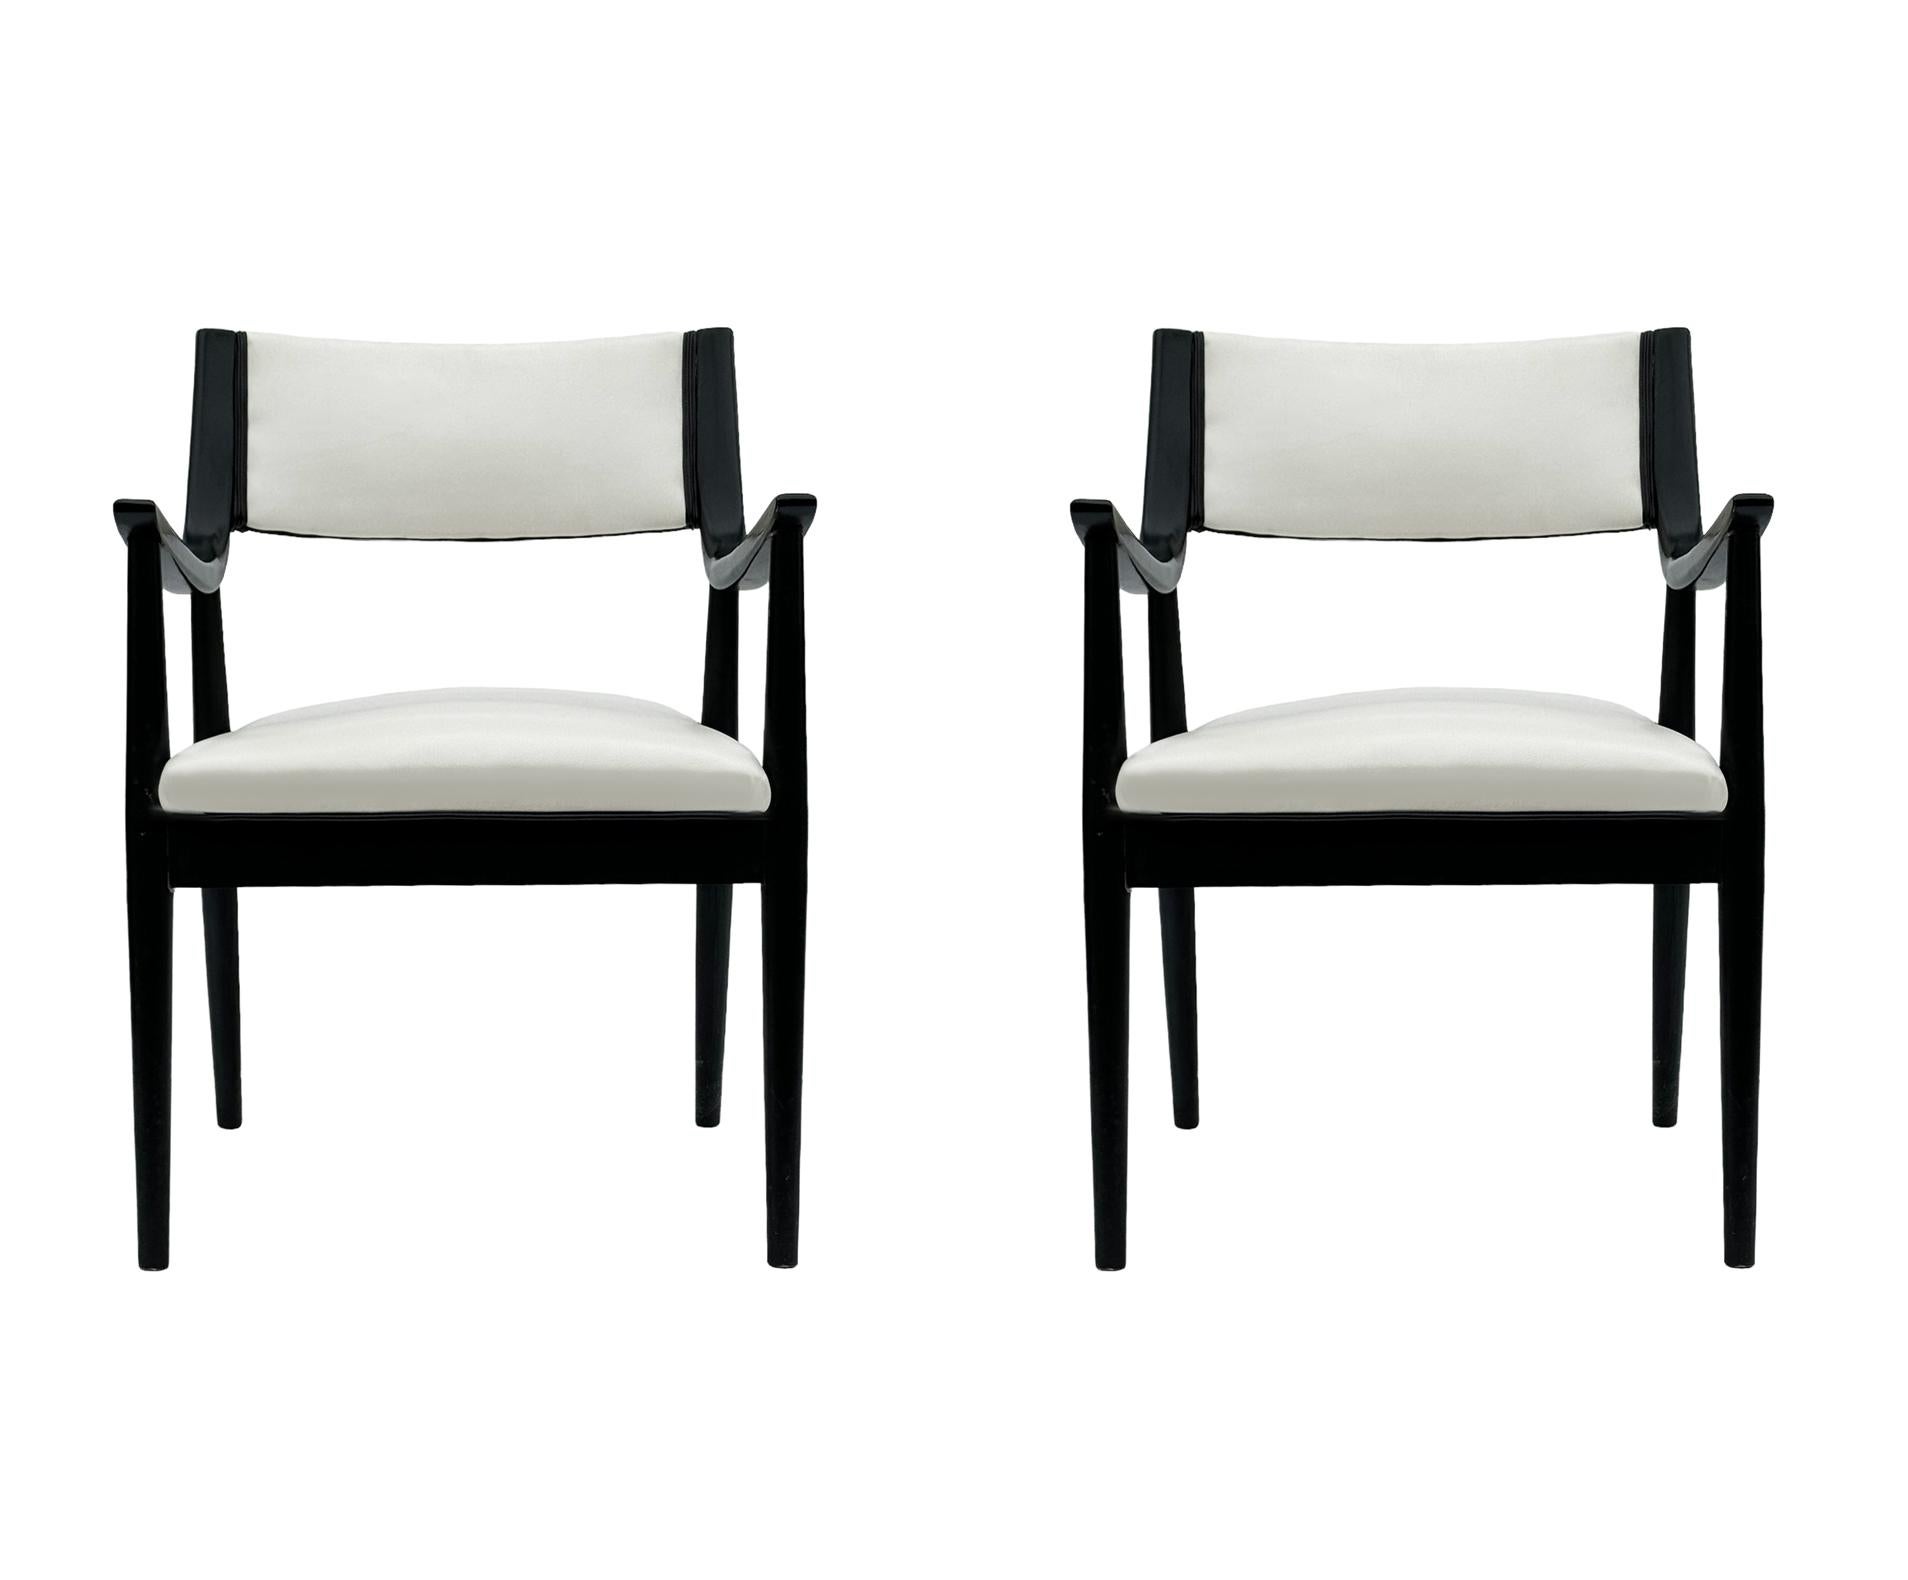 Pair of Mid-Century Modern Black Lacquer Danish Modern Style Armchairs in White In Good Condition For Sale In Philadelphia, PA